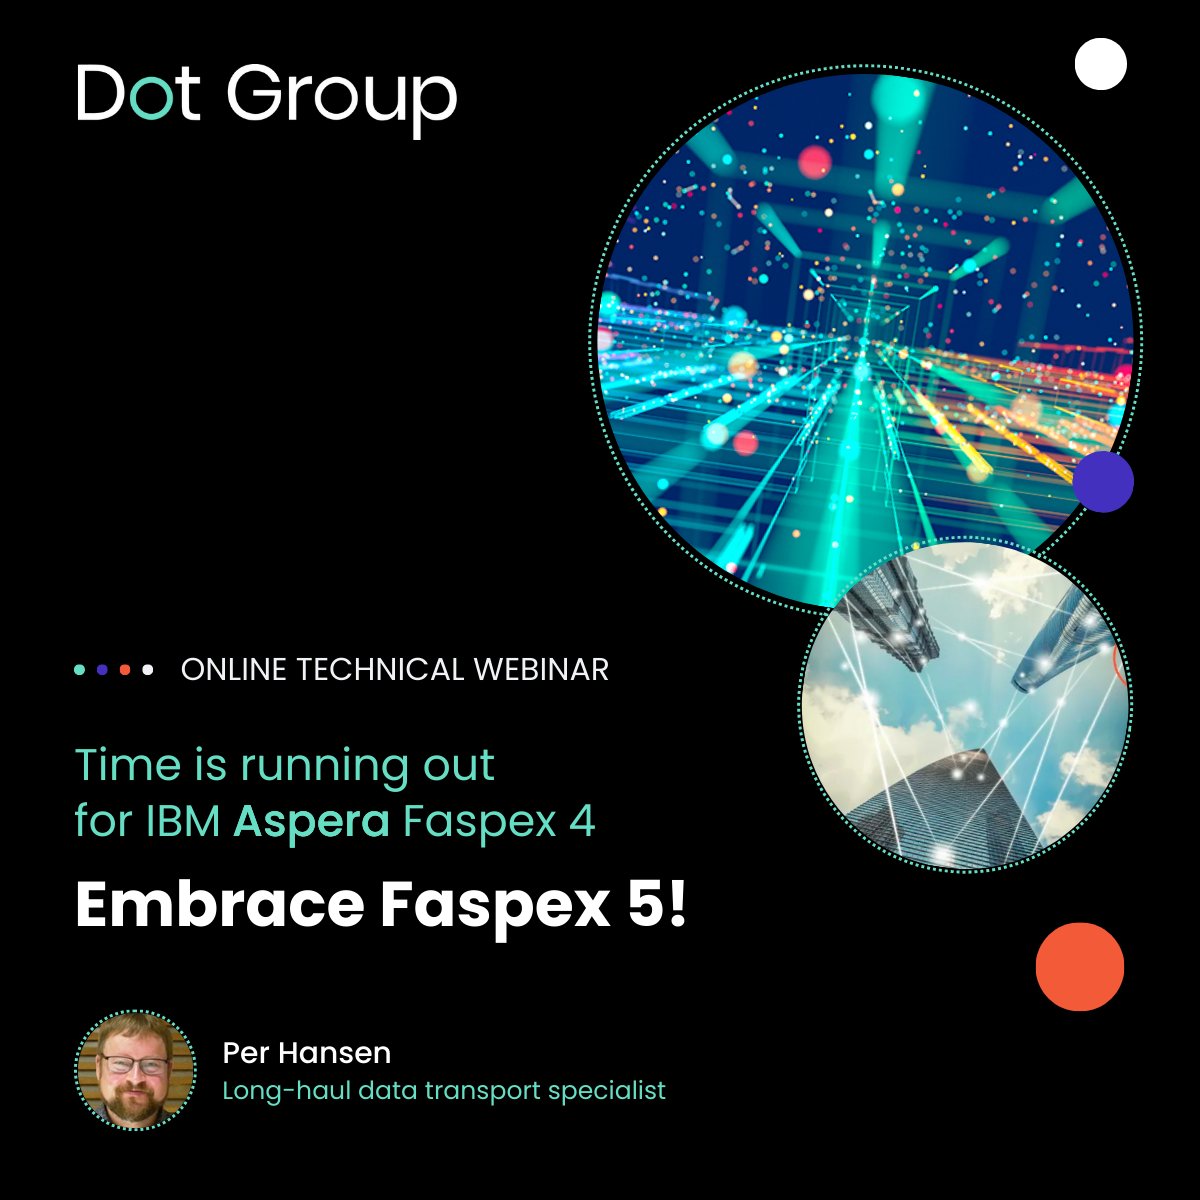 Head here to get involved in our technical webinar on 6 September, which will cover the end of support for #Faspex4 and introduce the powerful and innovative #Faspex5. Register at: dotgroup.co.uk/time-is-runnin… #PoweredByIBMAspera #MediaSupplyChain #TheDataExperts #IBMAspera